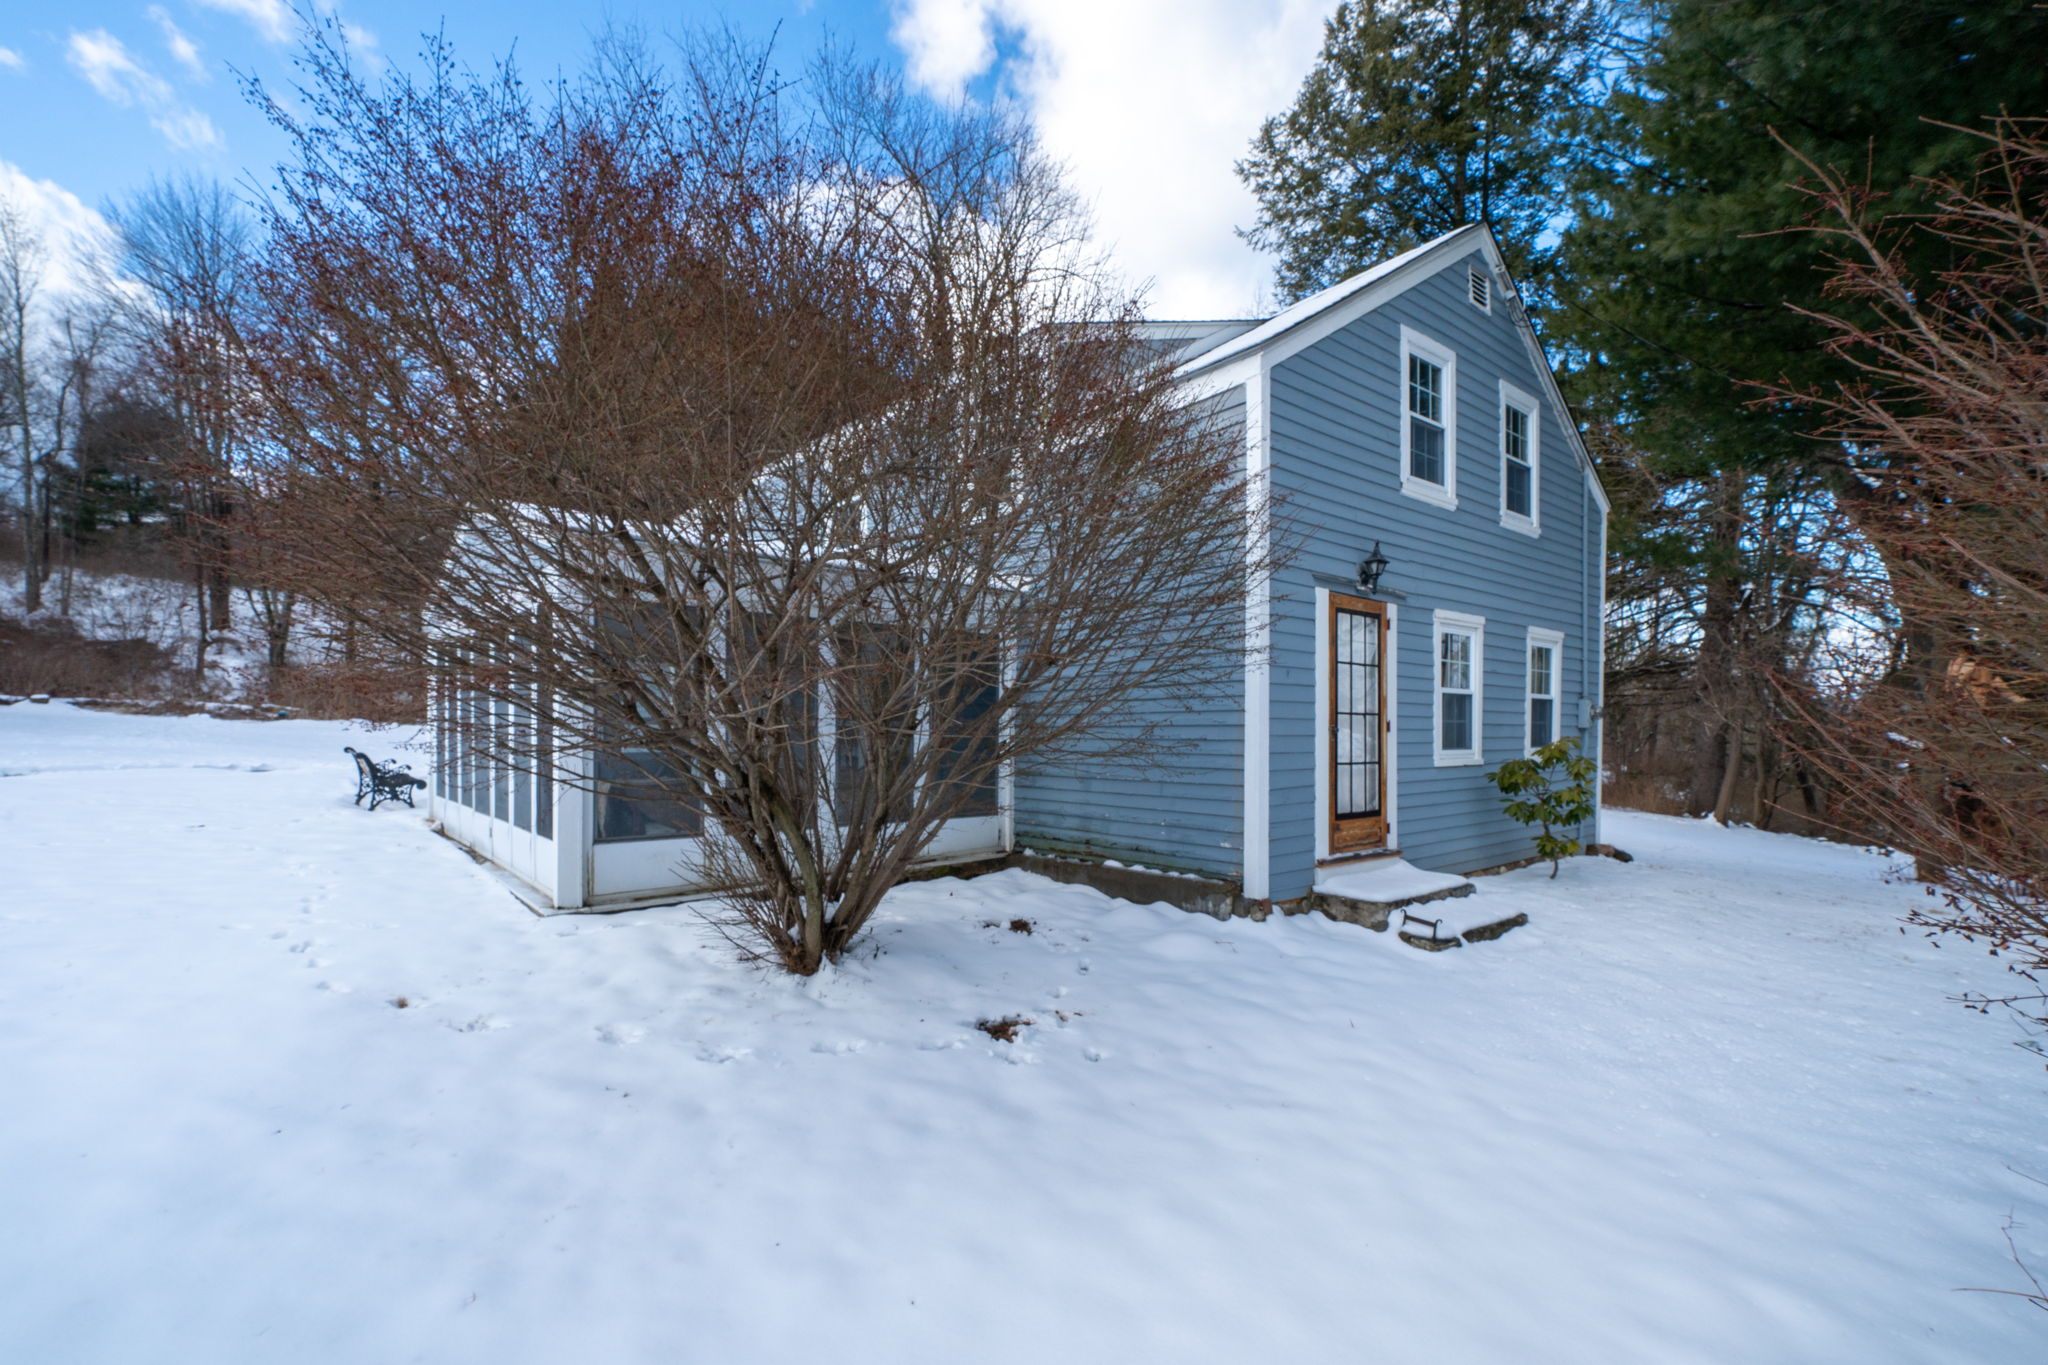  163 Day St, Granby, CT 06035, US